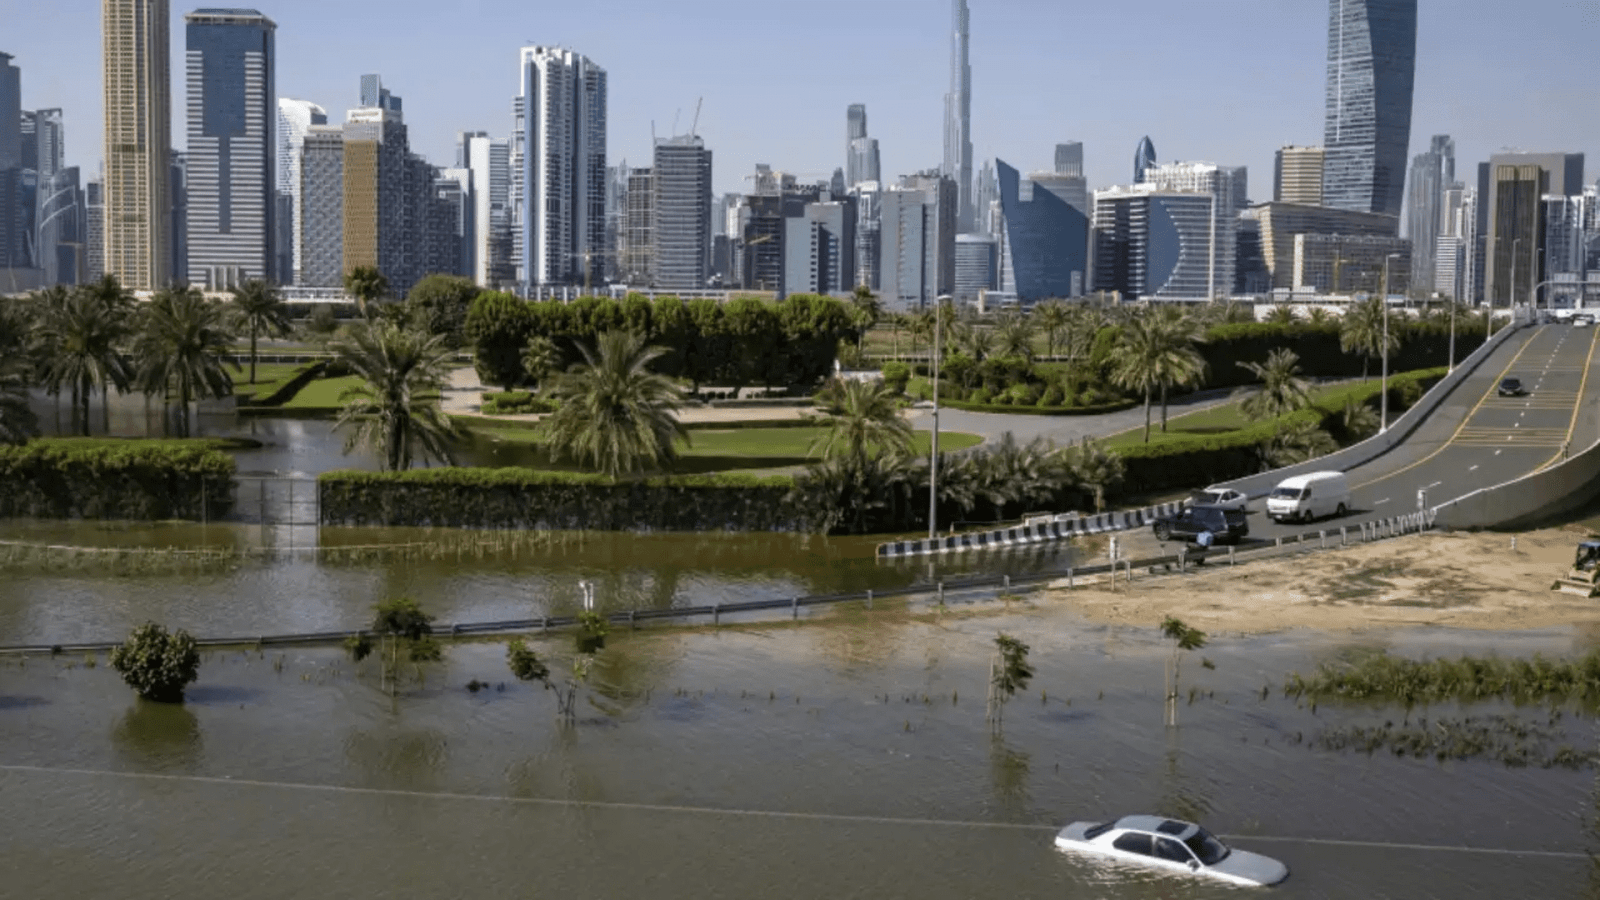 UAE braces for heavy rain: flights cancelled, residents advised to stay indoors